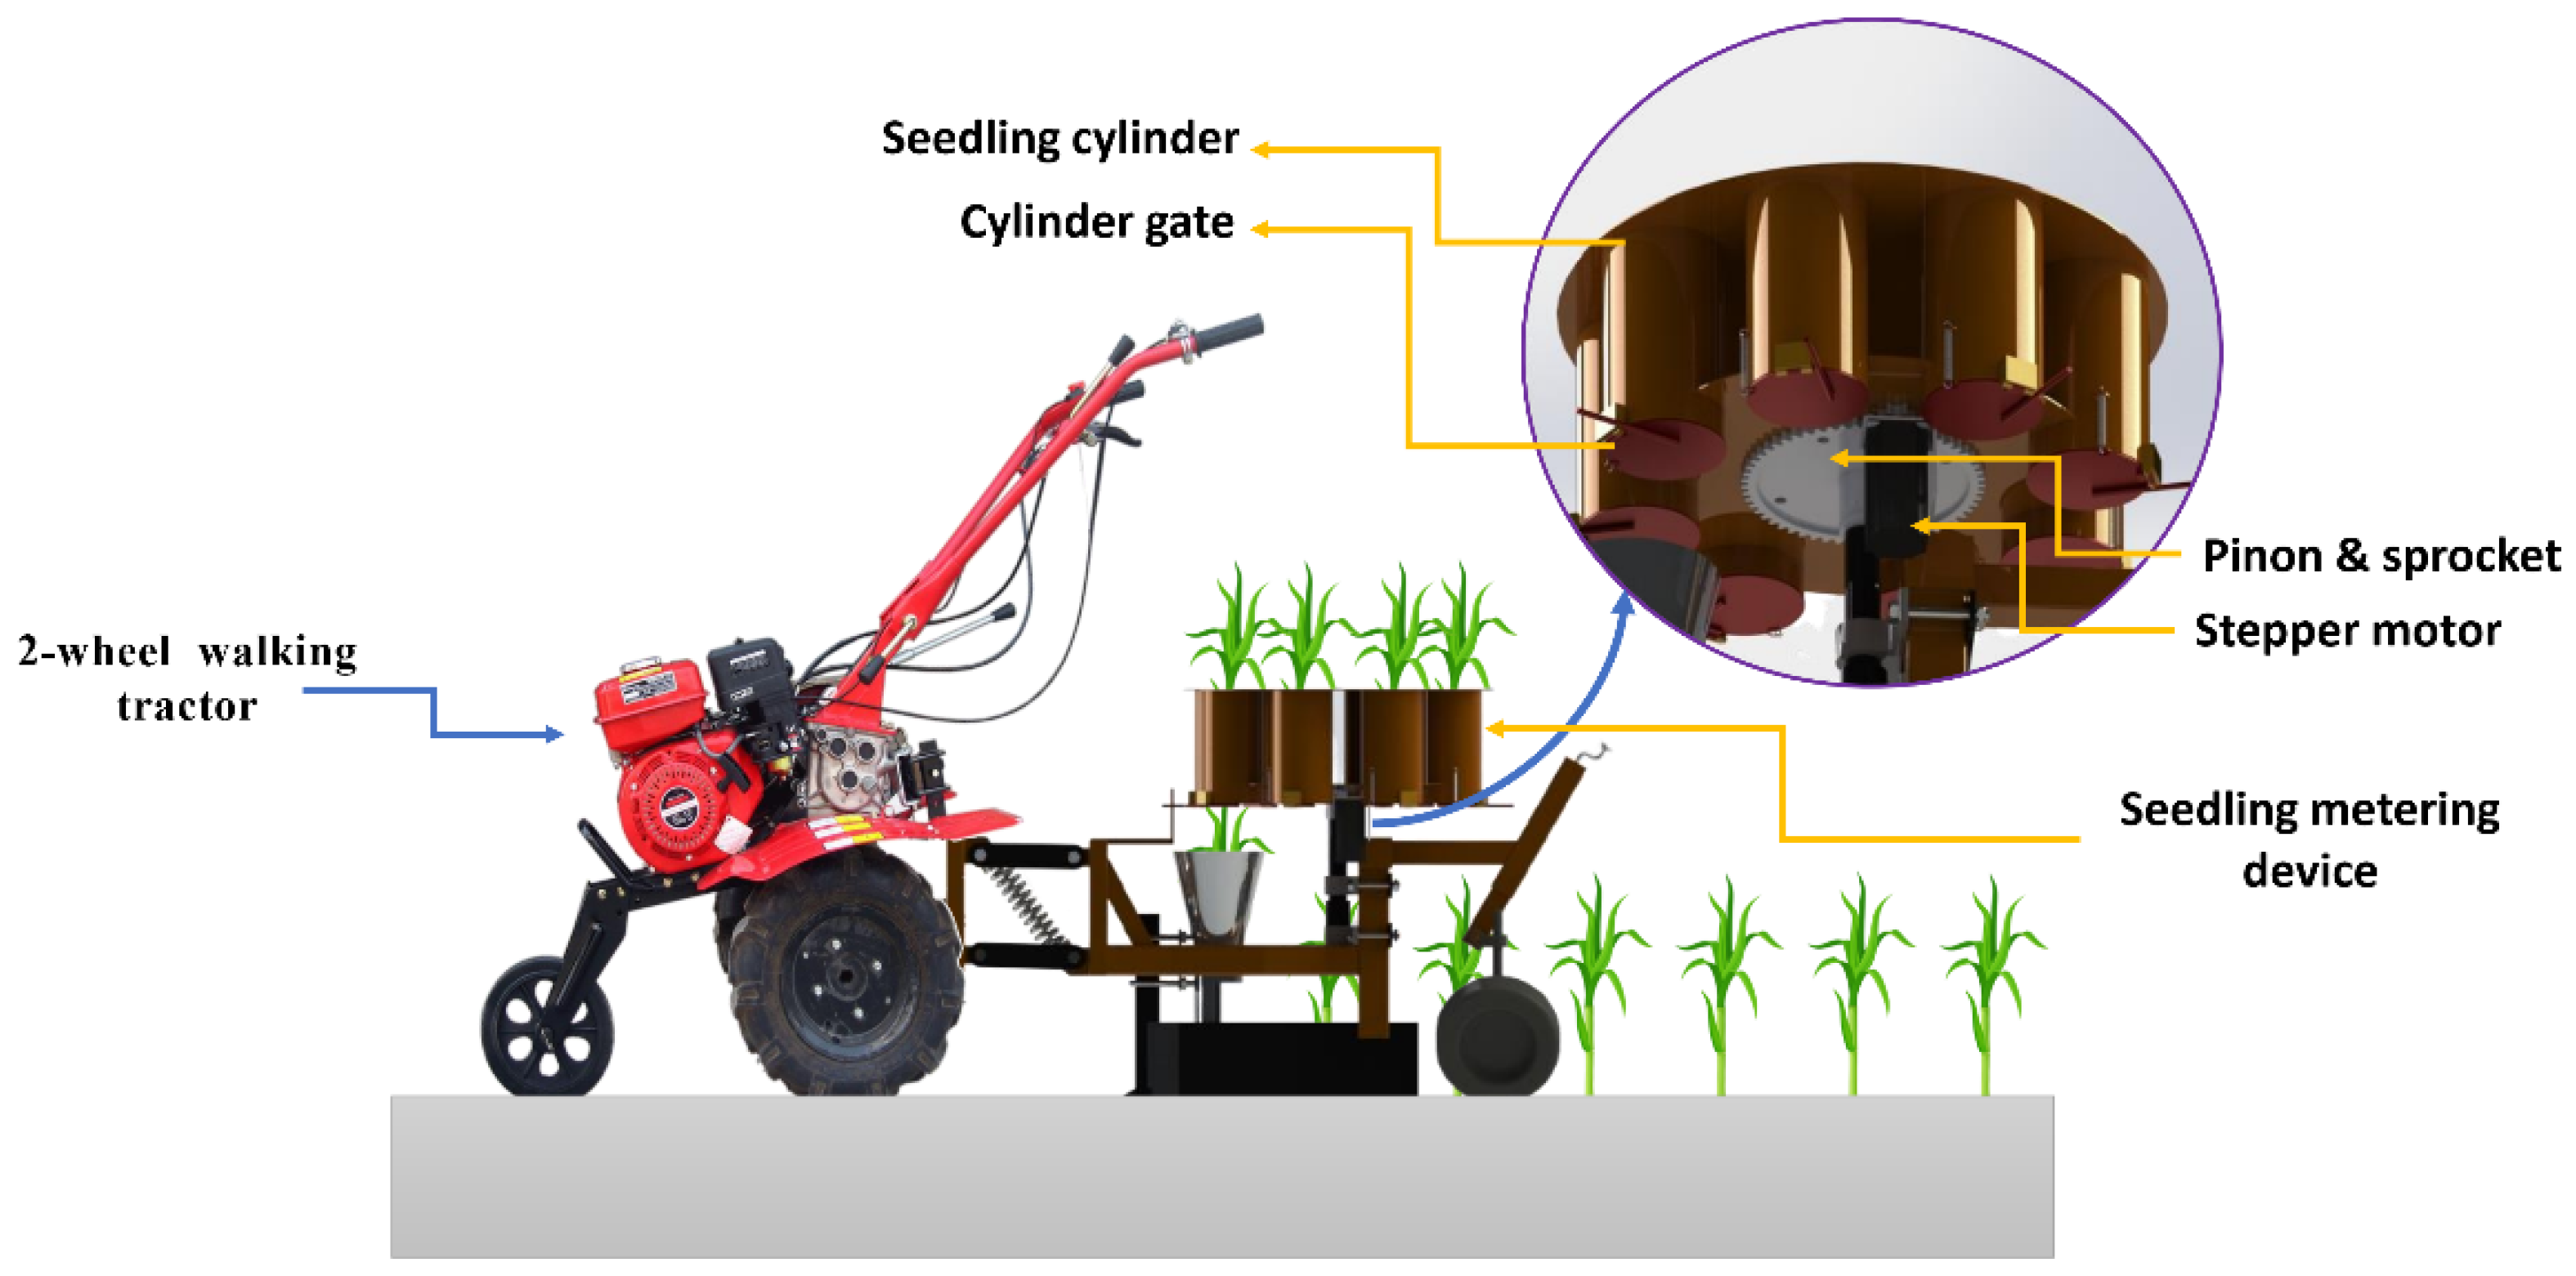 PDF] FABRICATION AND AUTOMATION OF SEED SOWING MACHINE USING IOT